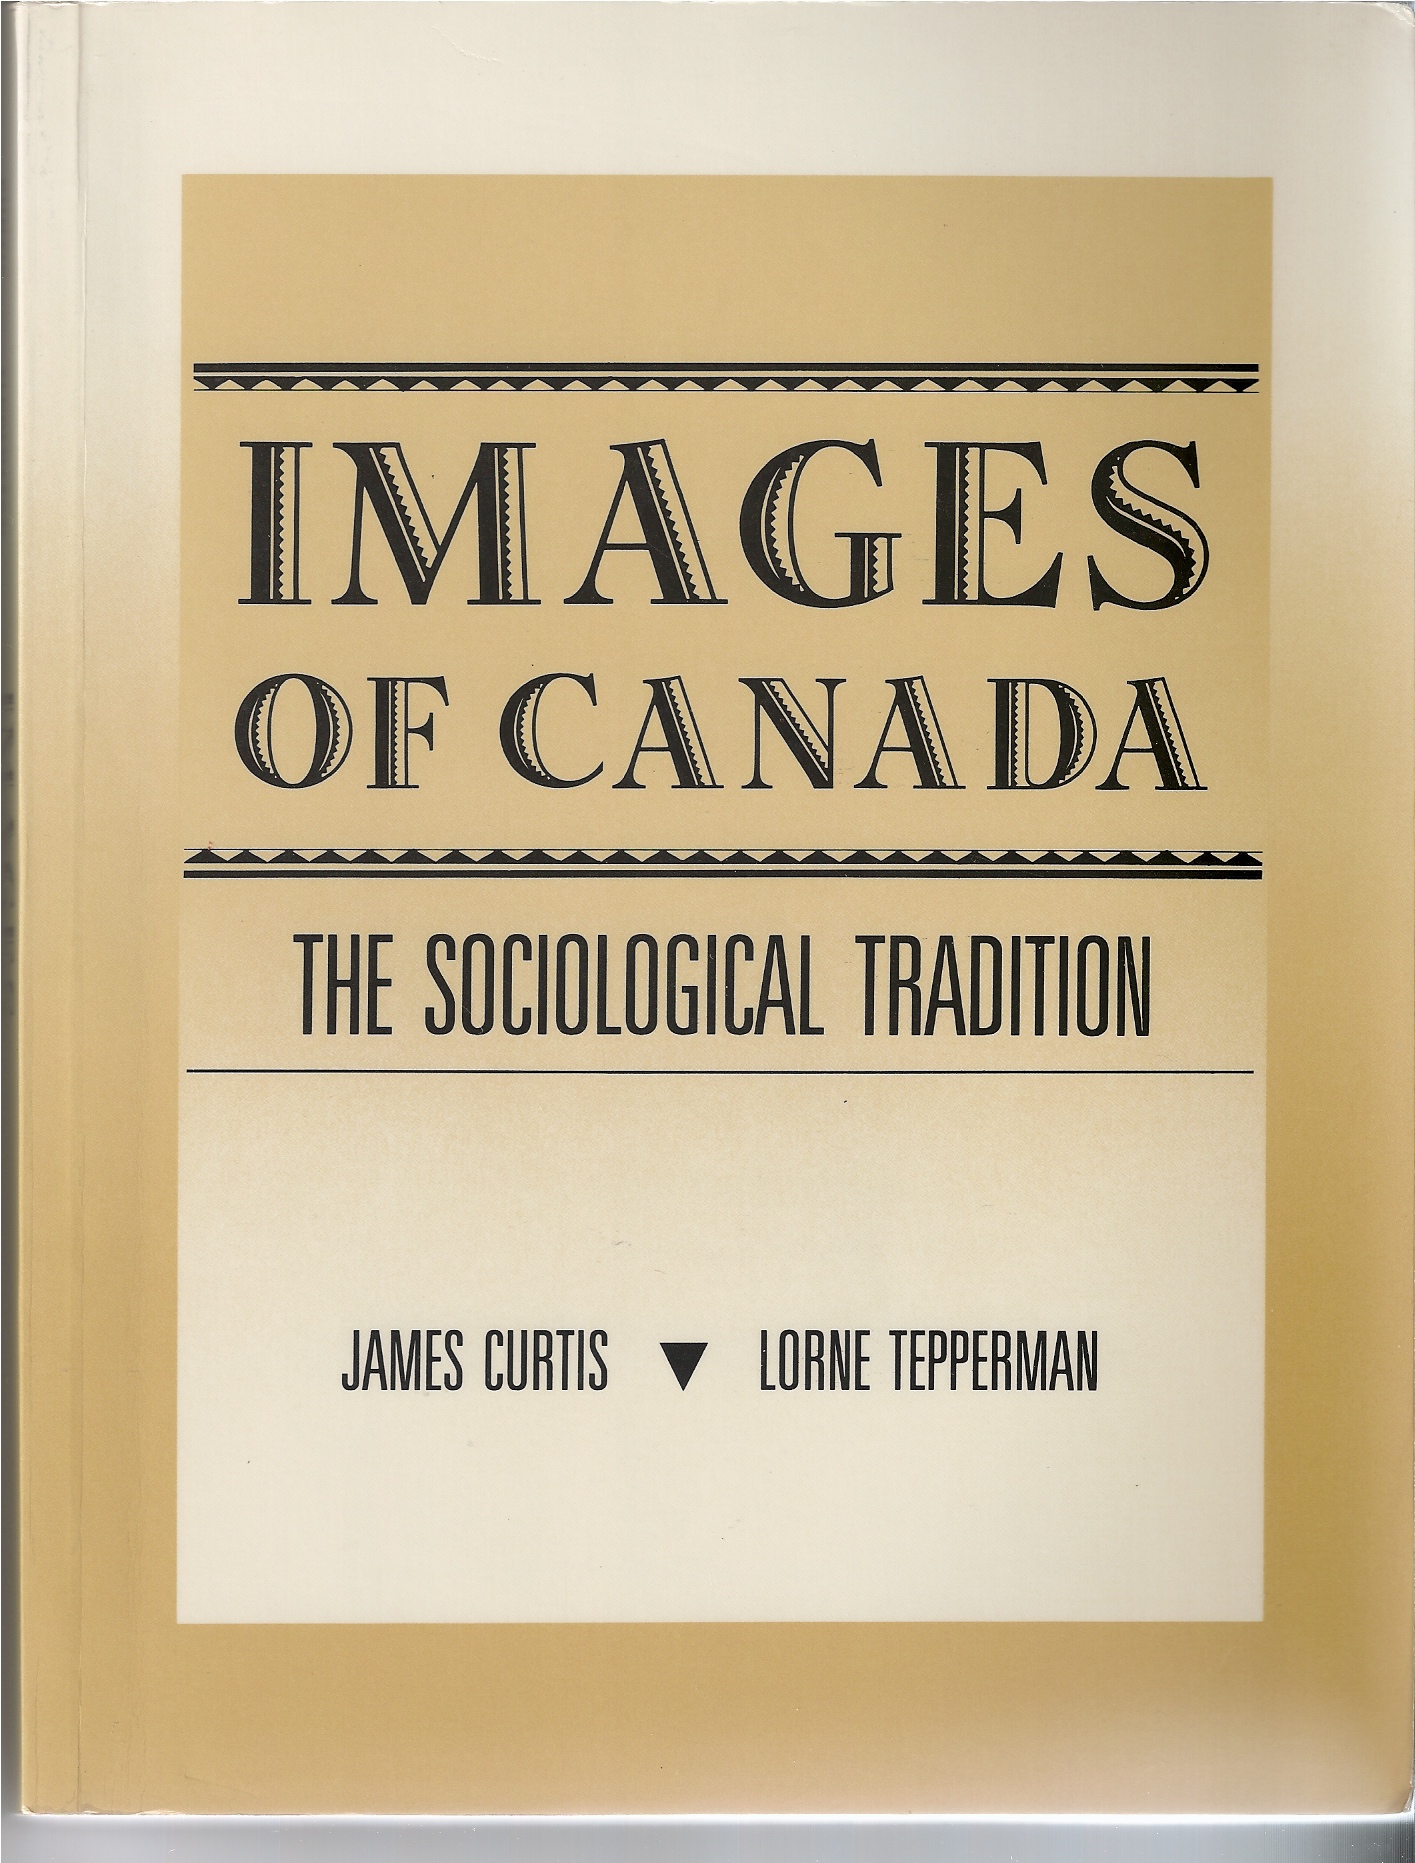 CURTIS JAMES, LORNE TEPPERMAN - Images of Canada